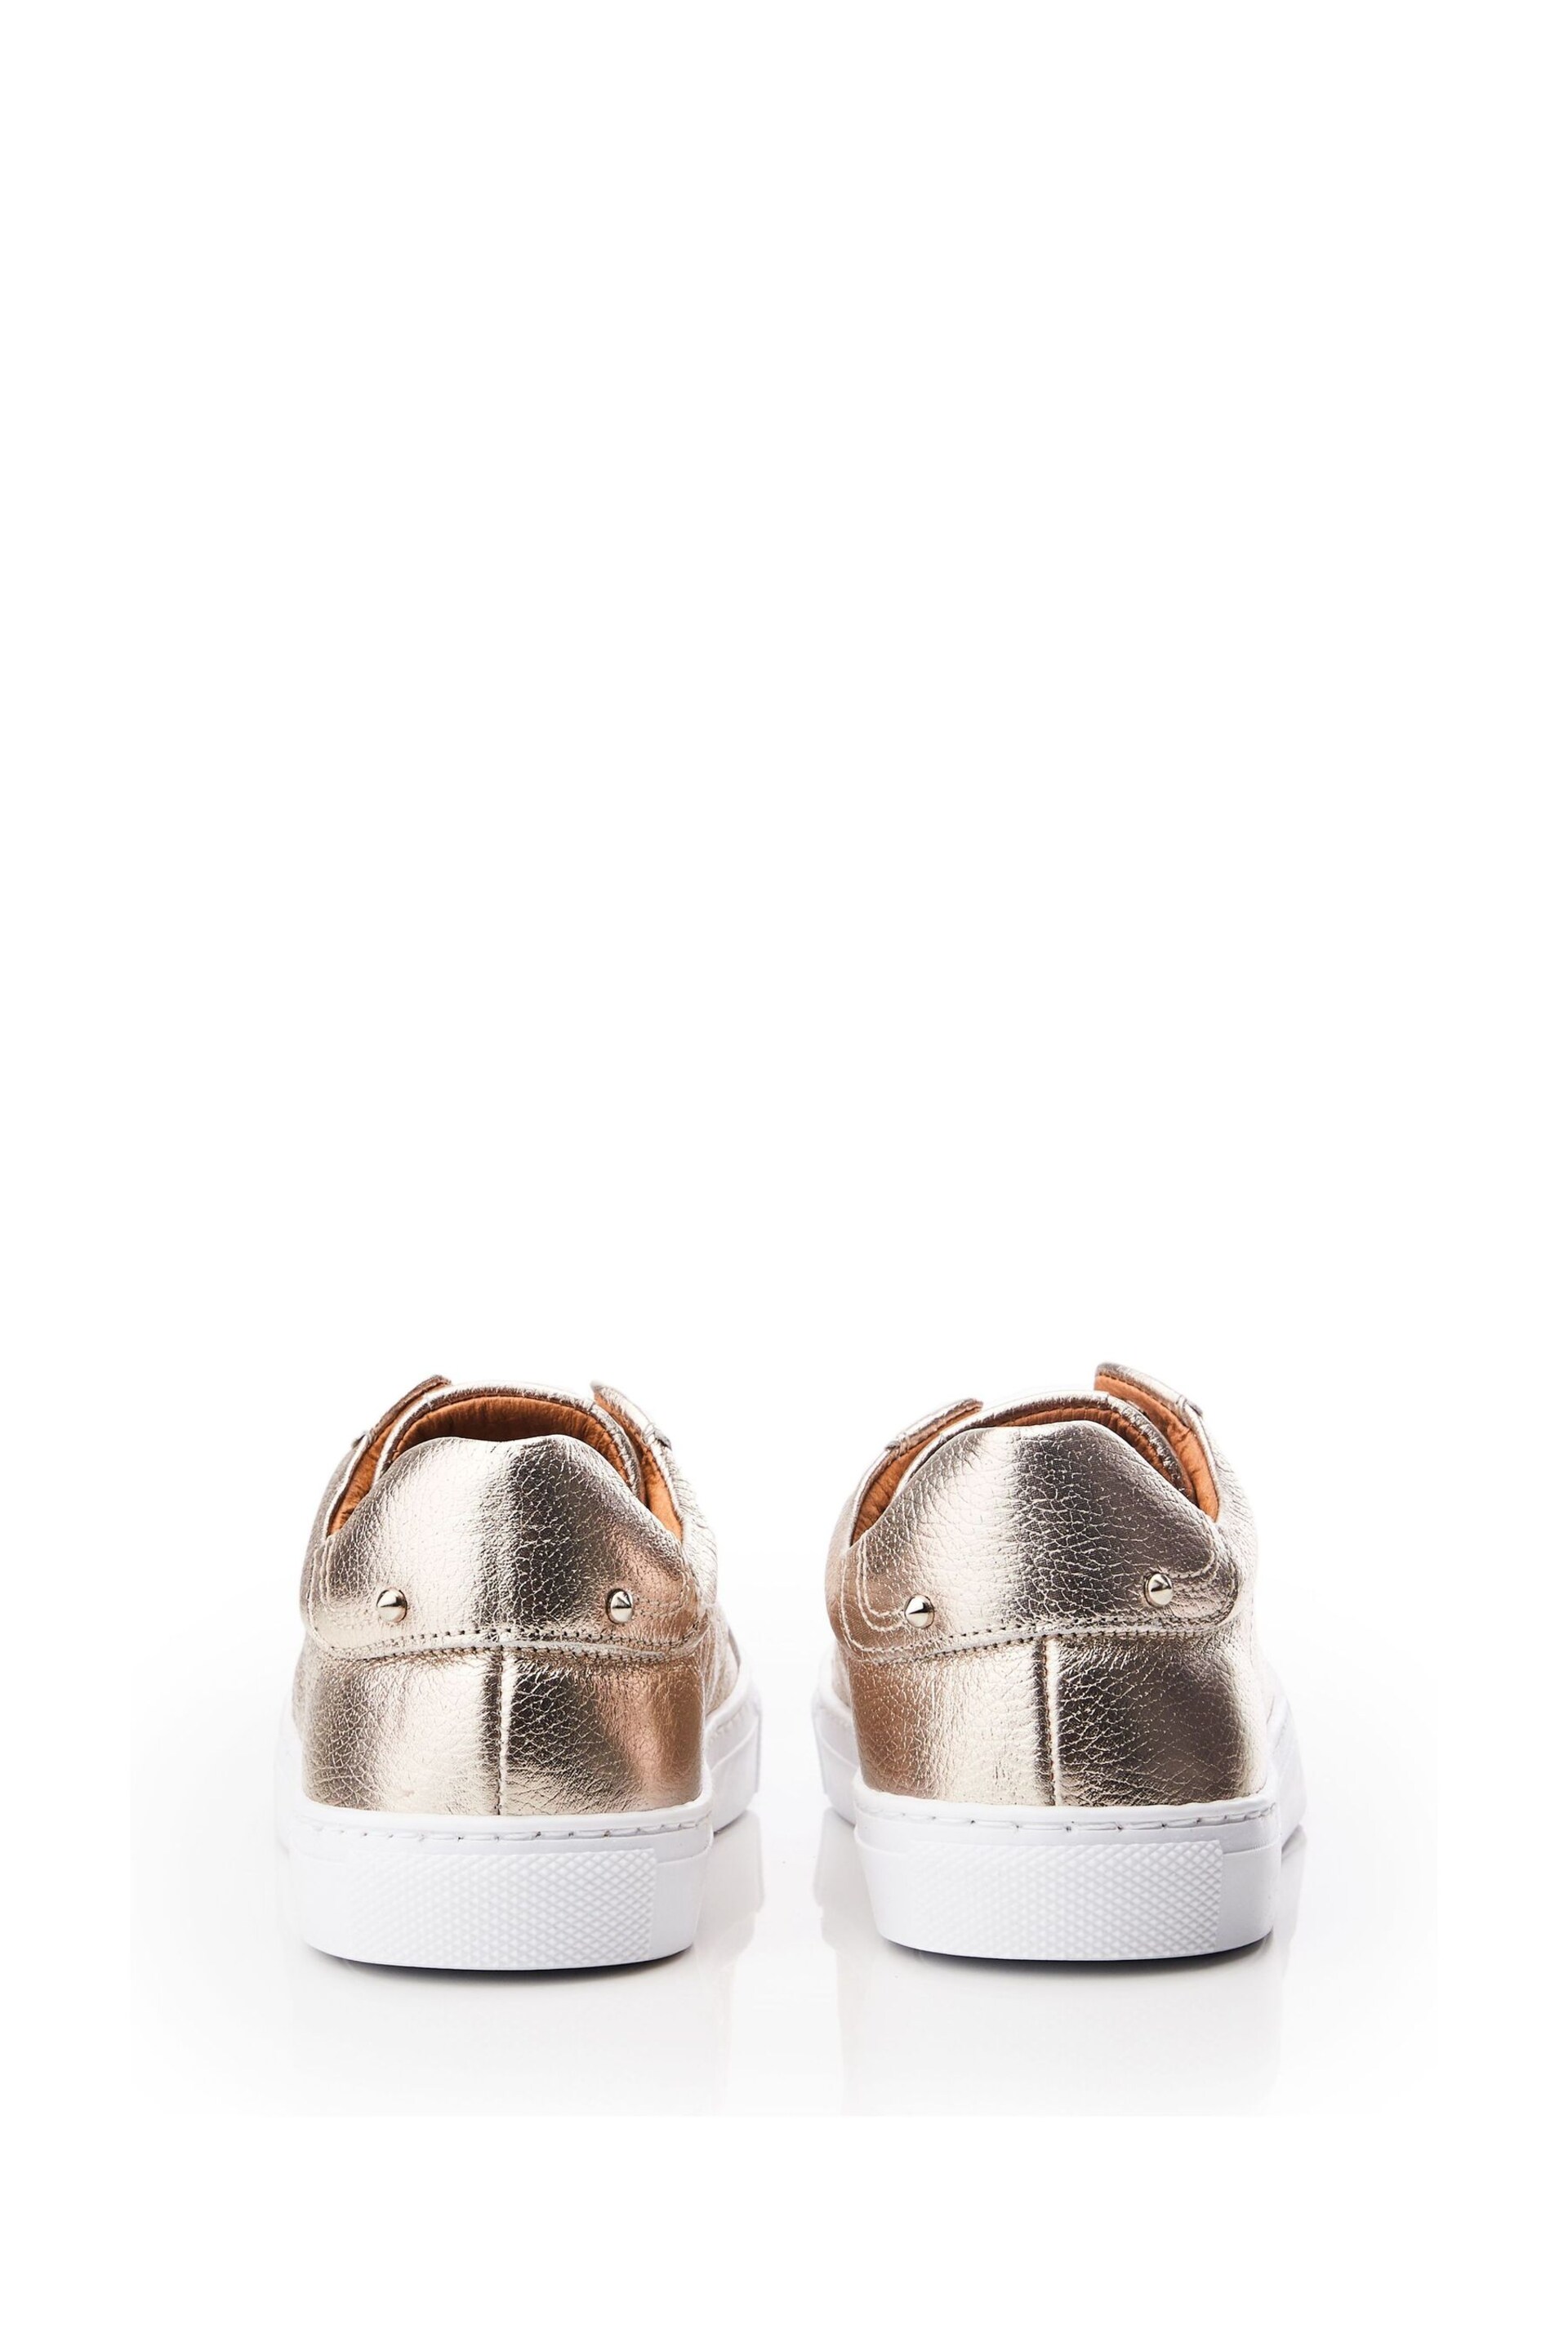 Moda in Pelle Bencina Slip On White Trainers with Elastic - Image 3 of 4